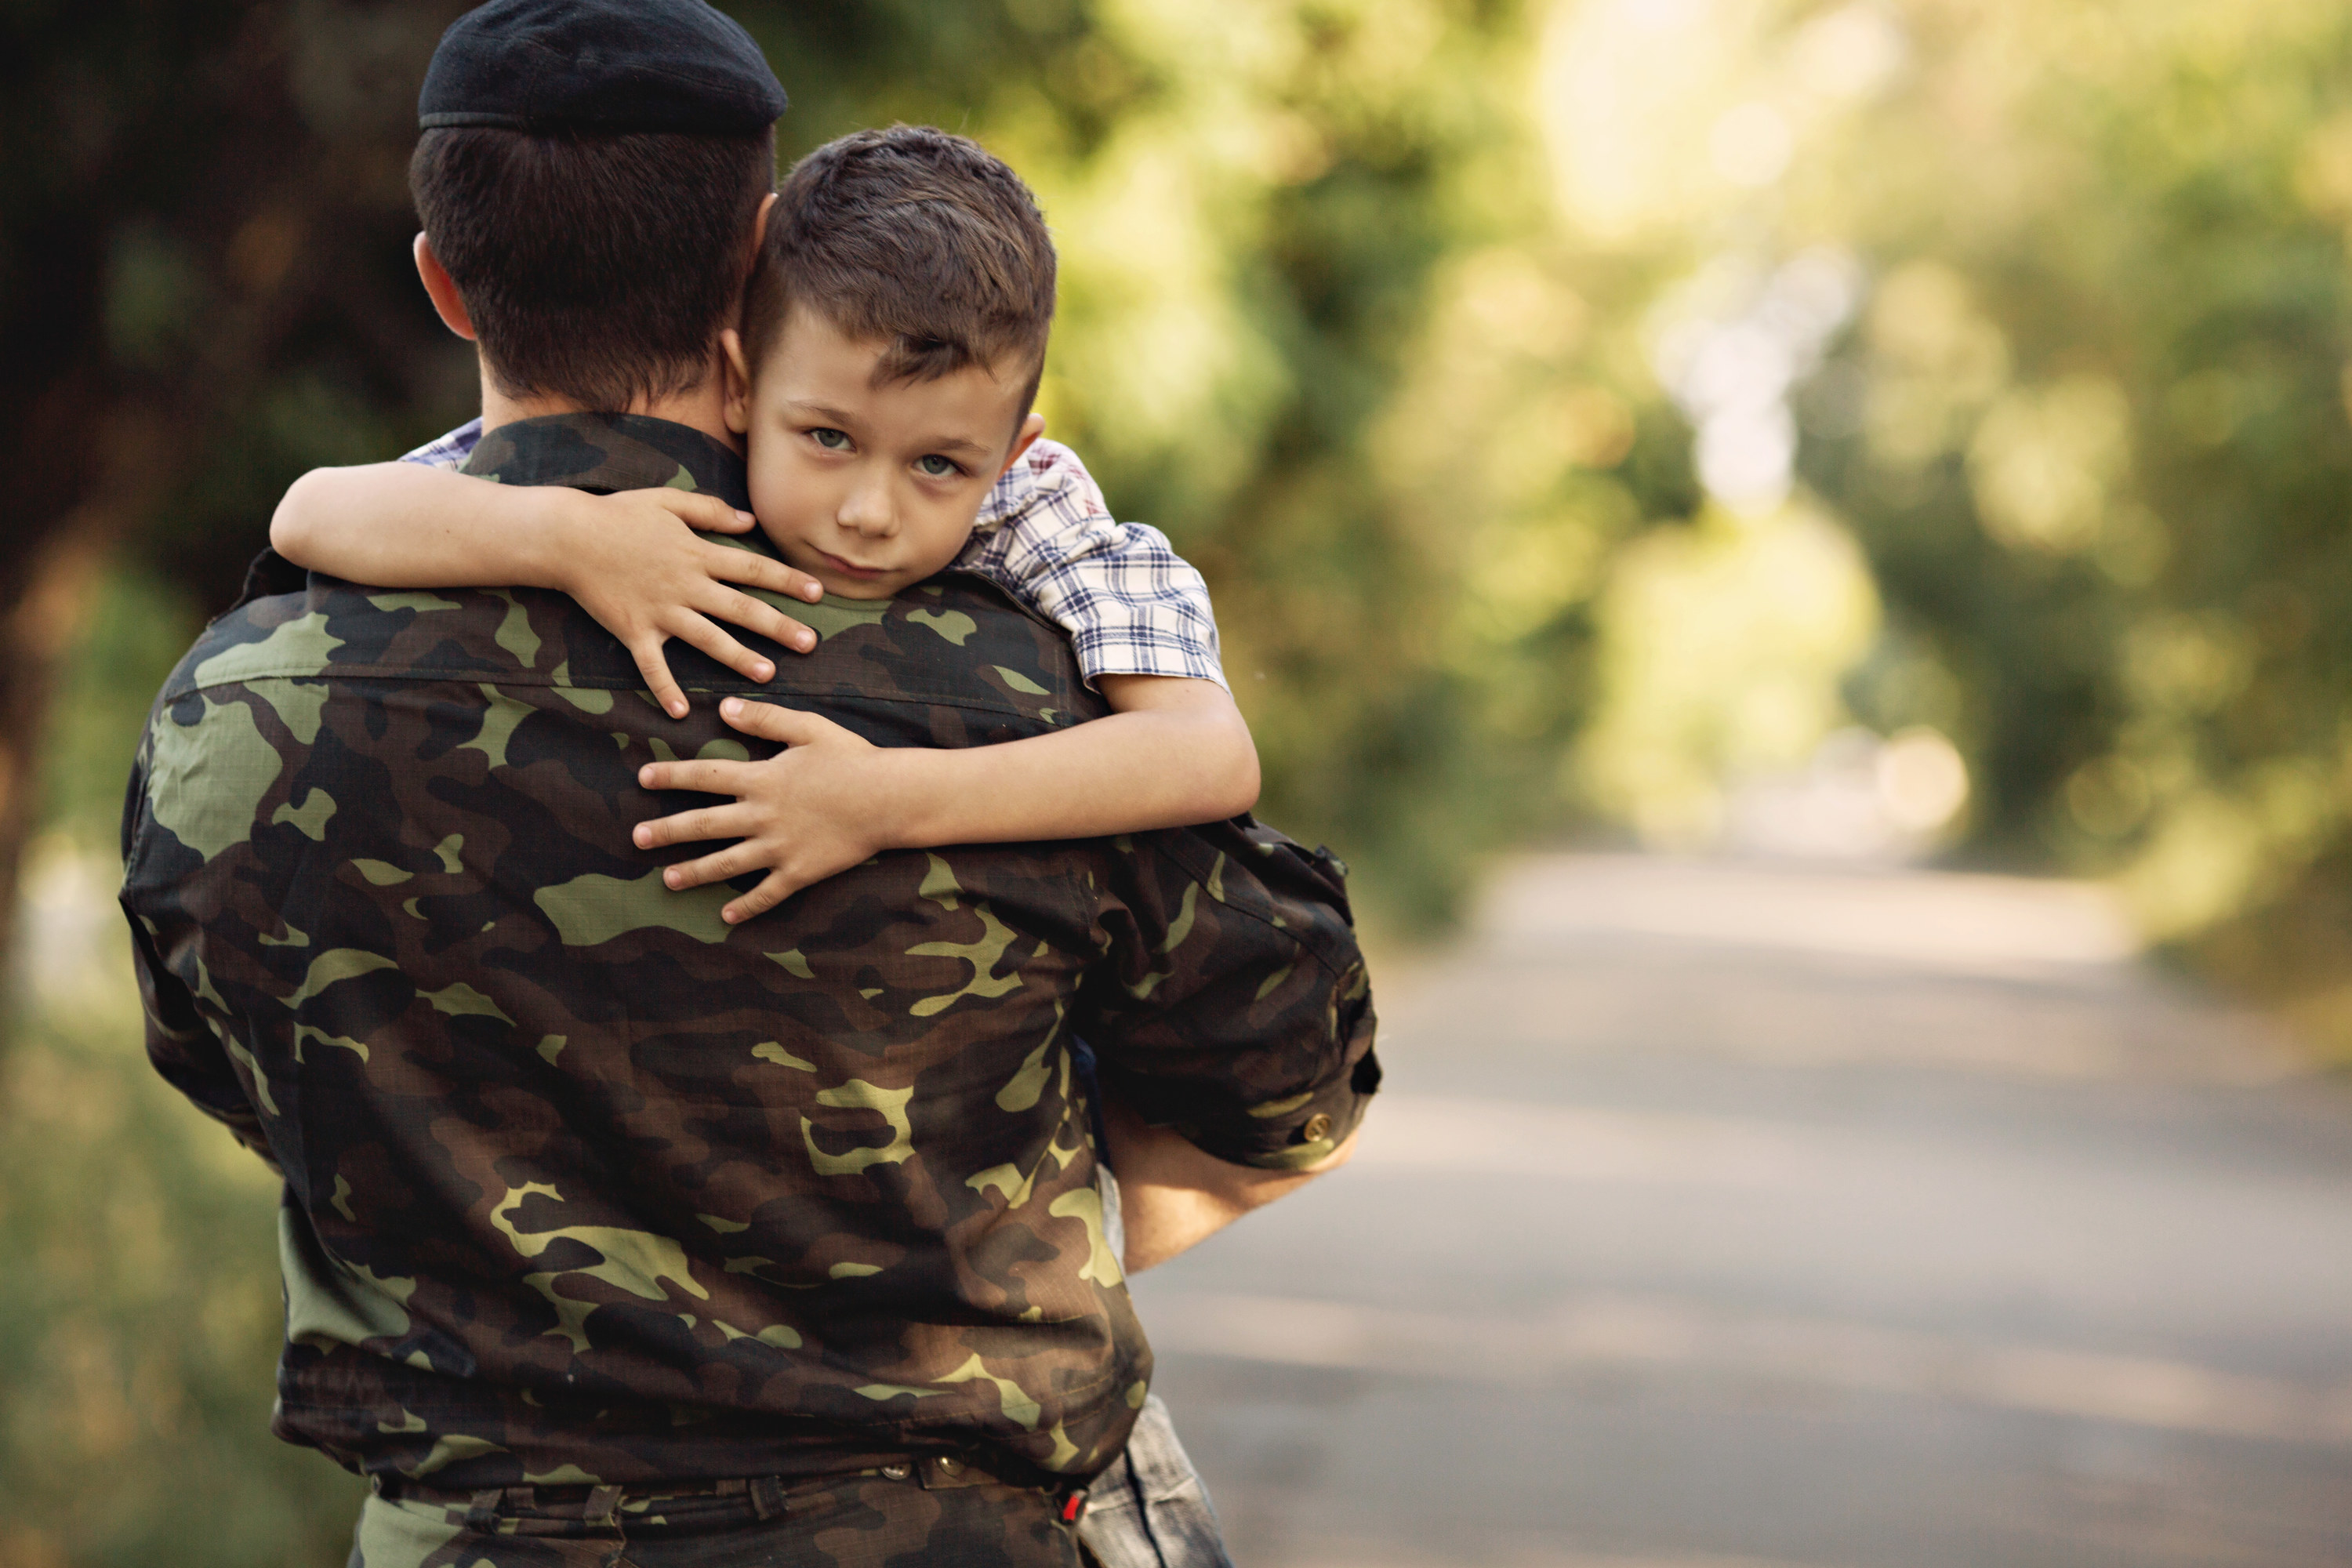 Little boy and soldier in a military uniform say goodbye before a separation